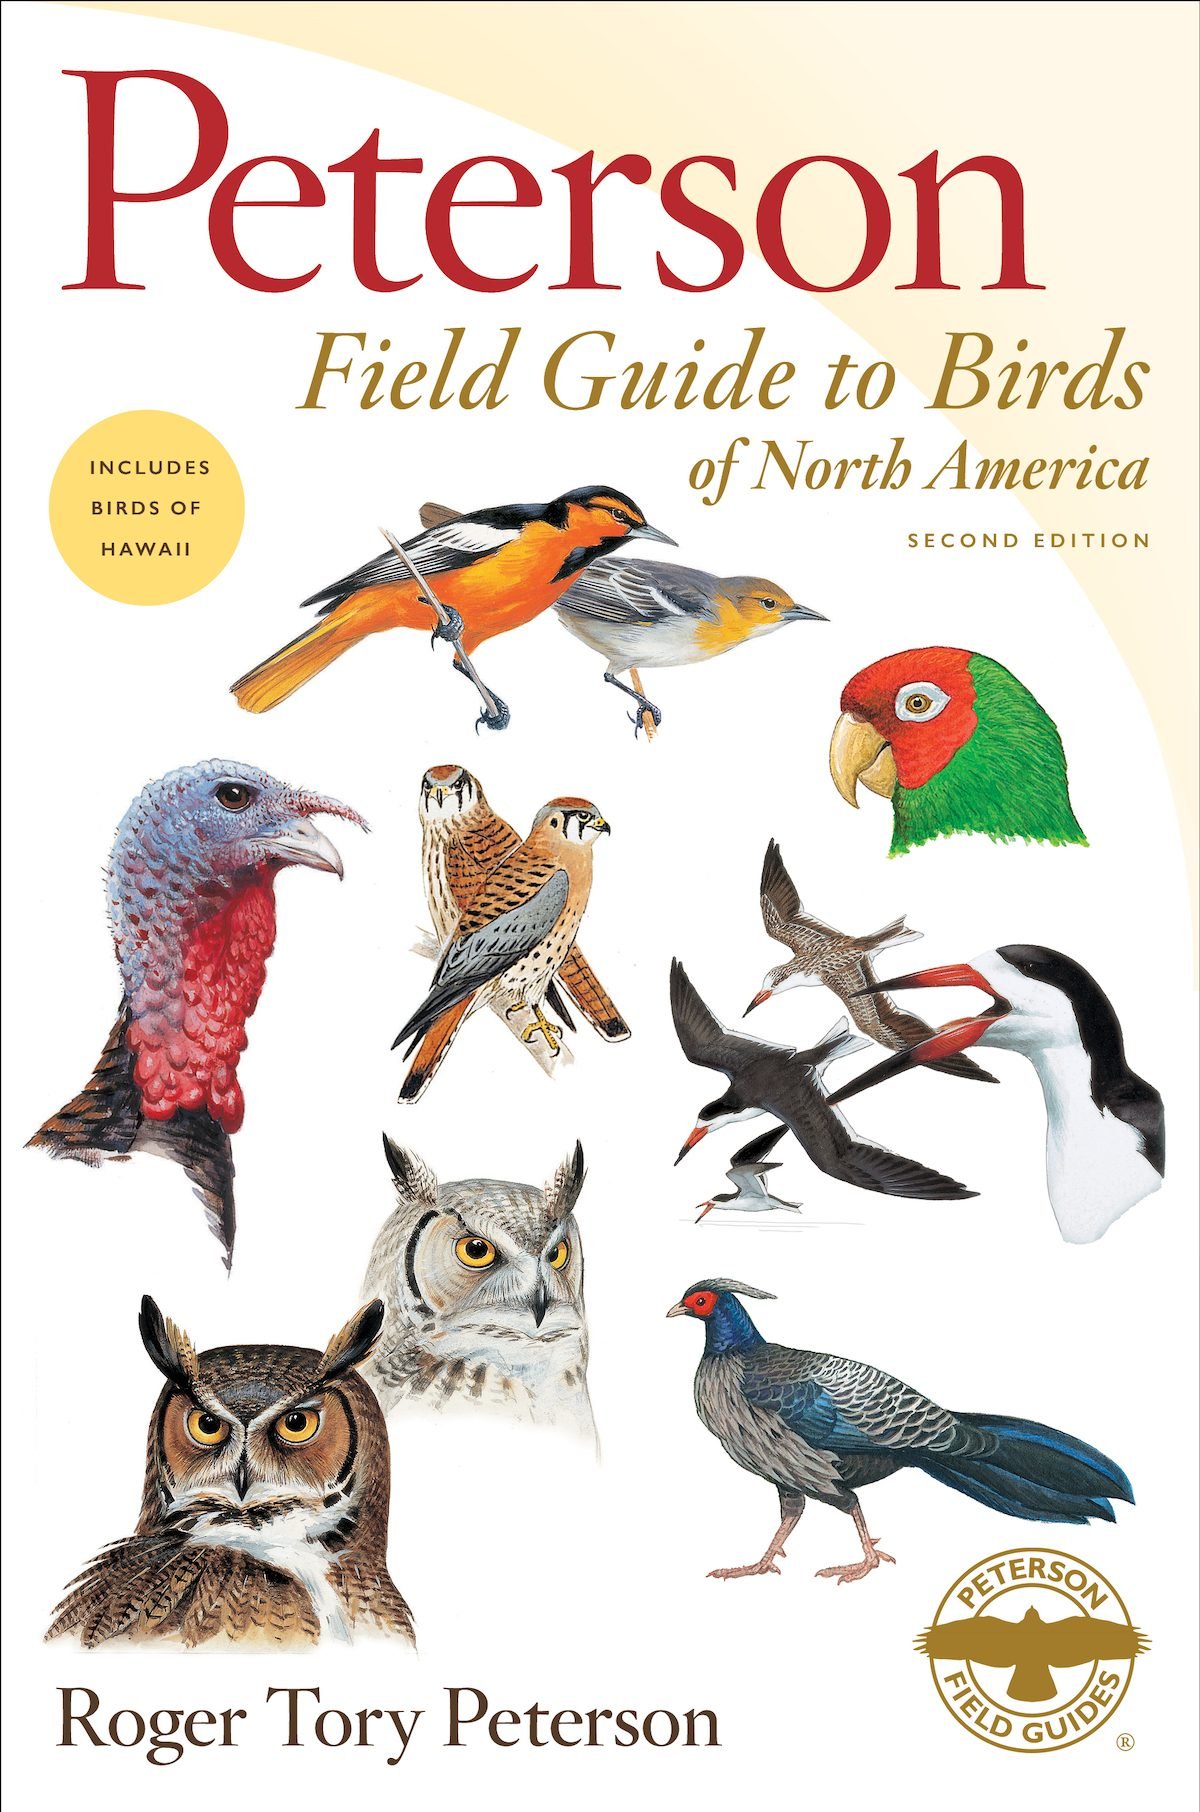 North American Wildlife, Illustrated Field Guide, Reader's Digest